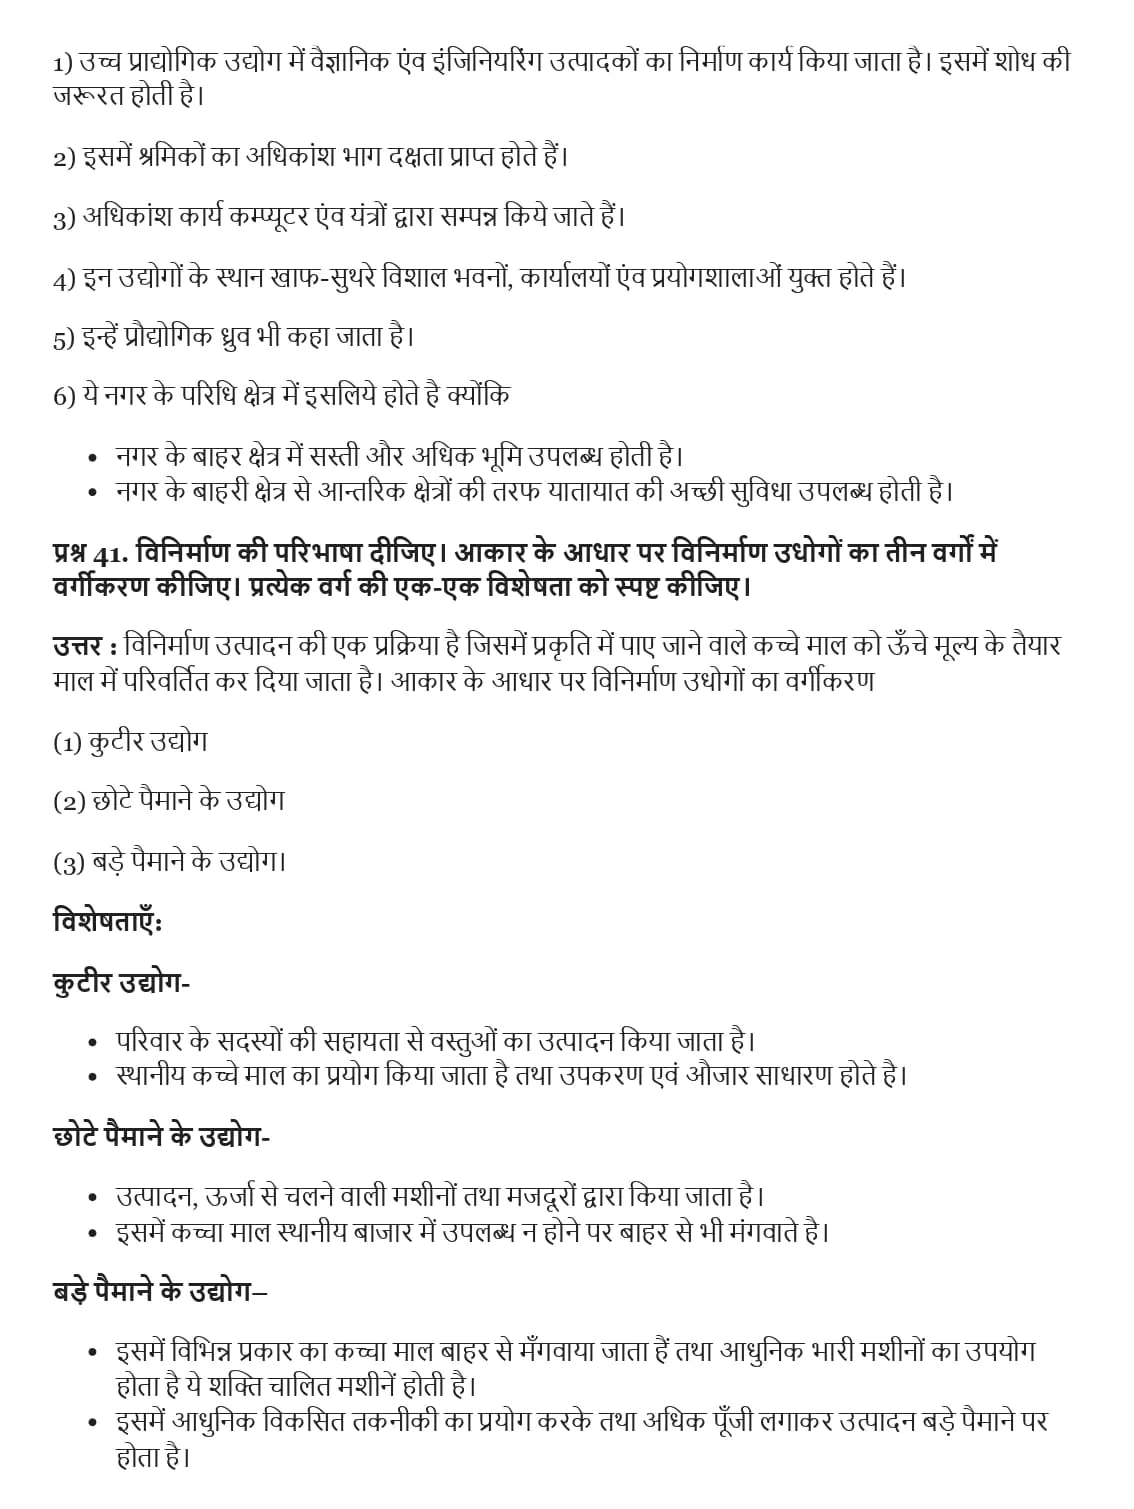 UP Board Important Questions Class 12 Chapter 6 009